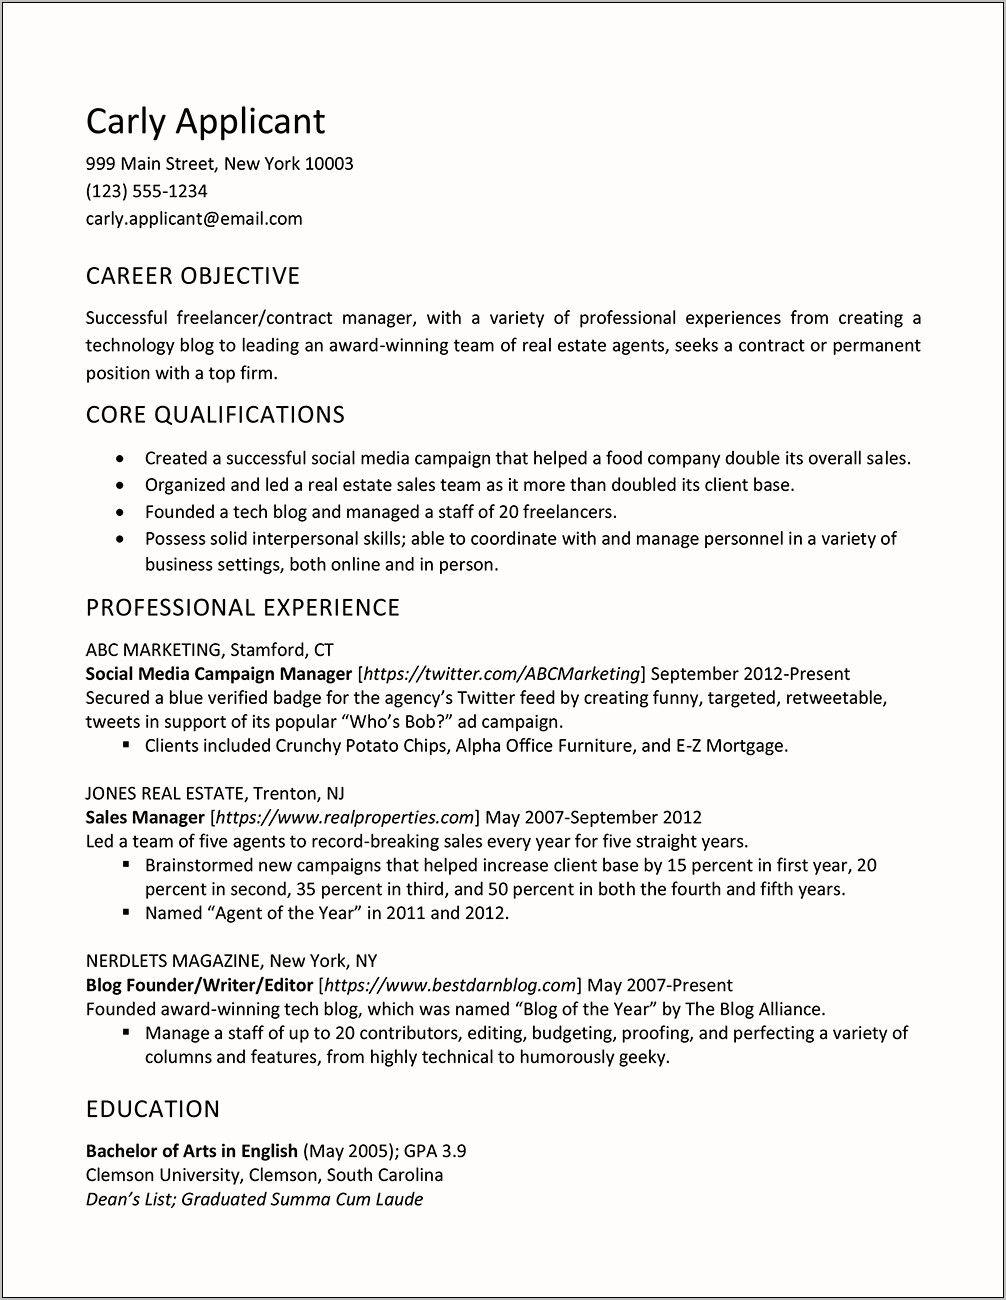 Examples Of Resumes With Current Position Listed